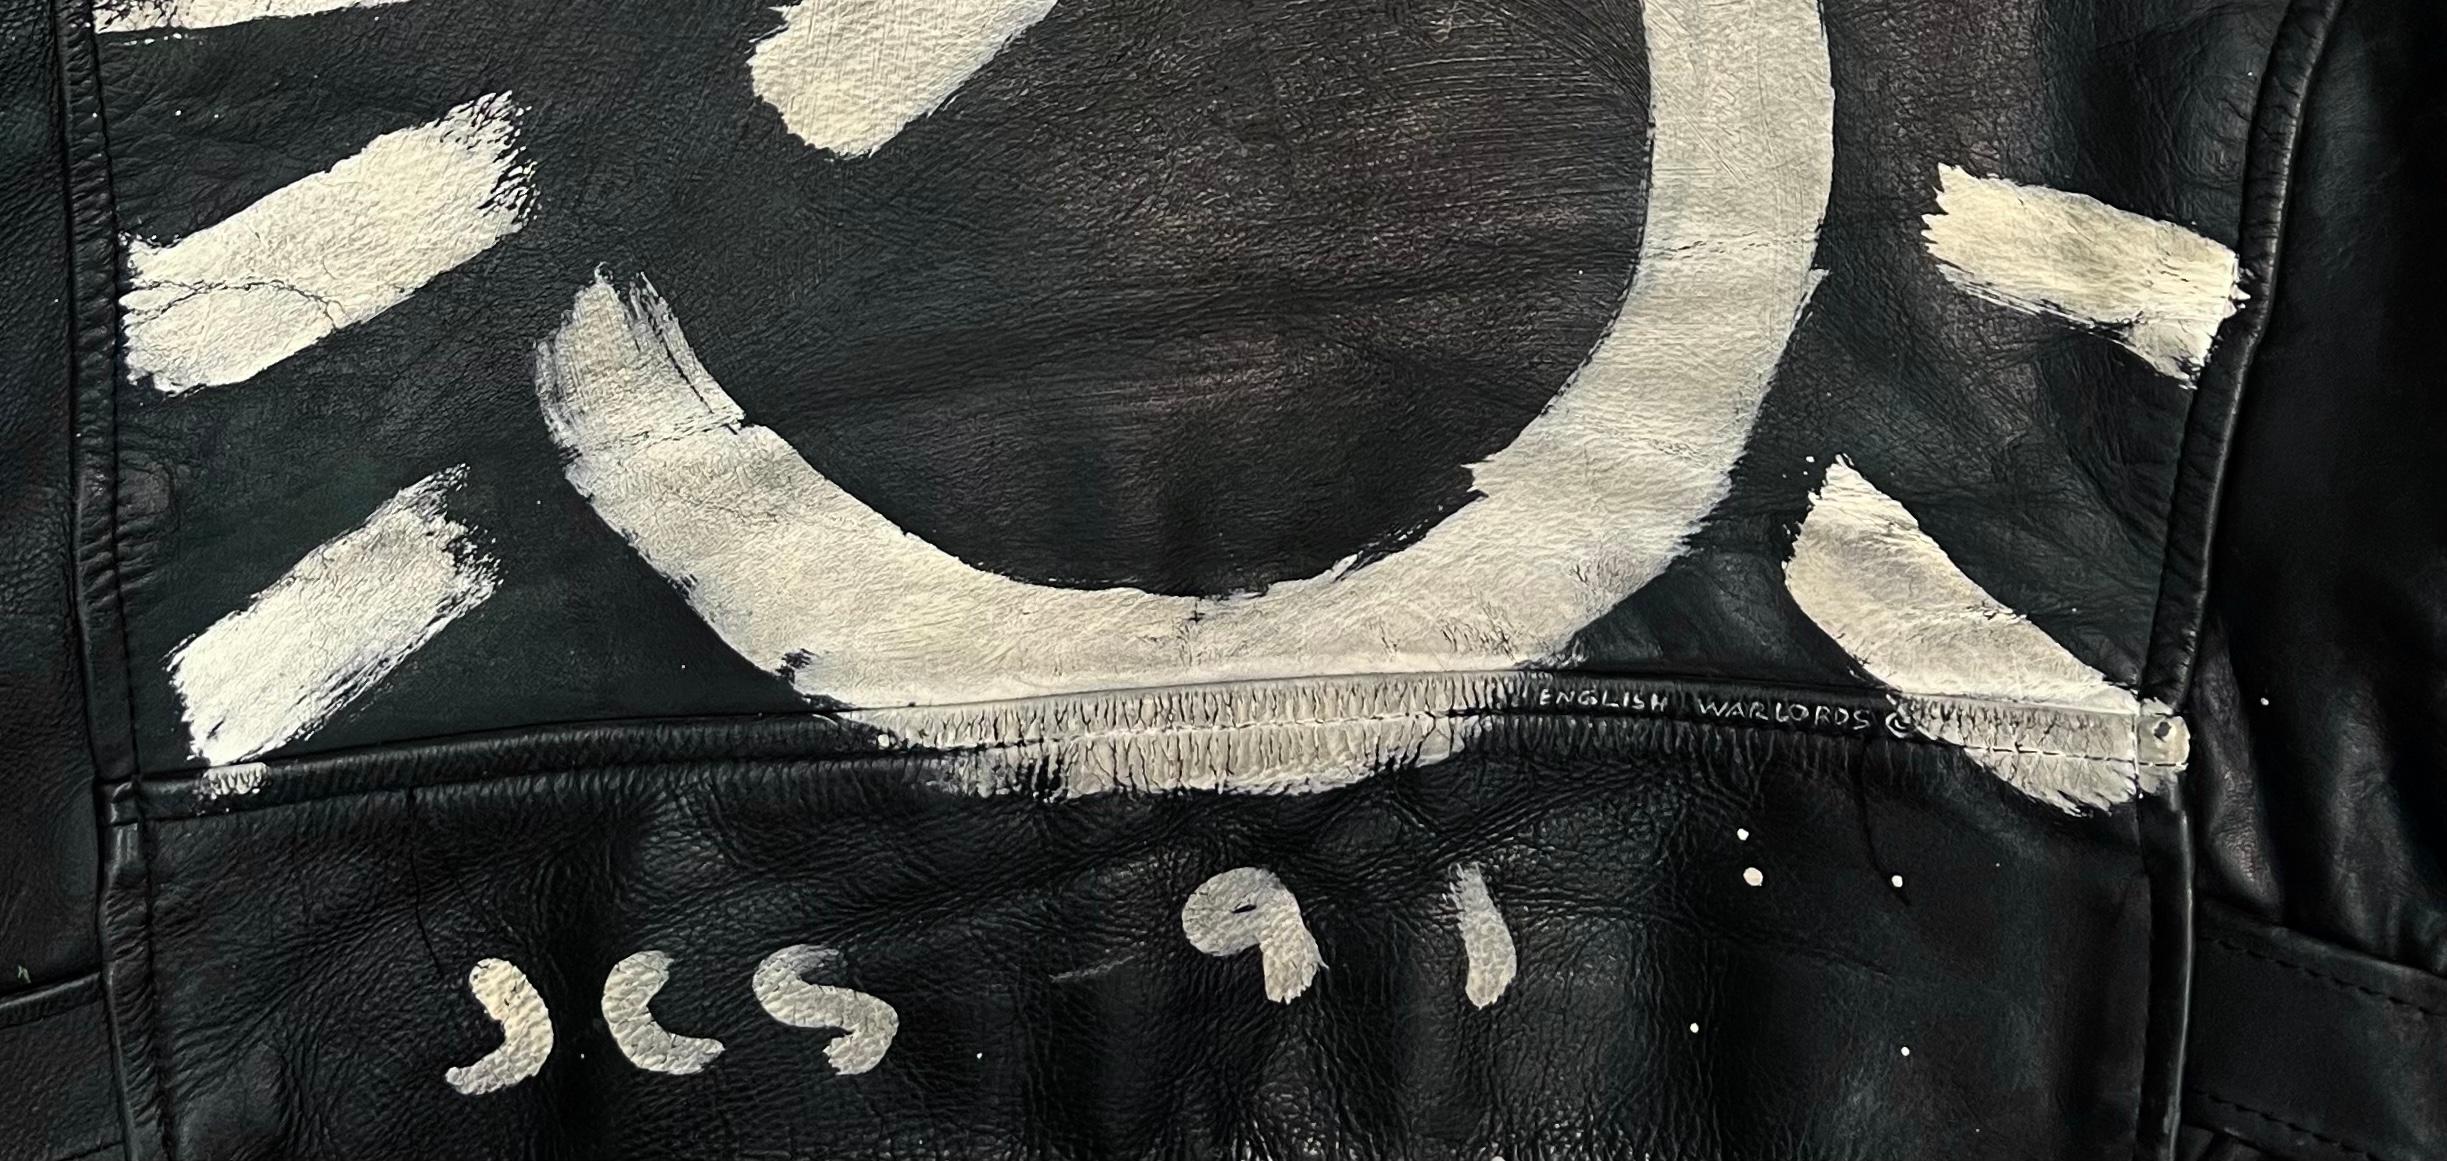 Julian Schnabel Hand Painted Leather Jacket 1991 (Julian Schnabel painting) For Sale 4